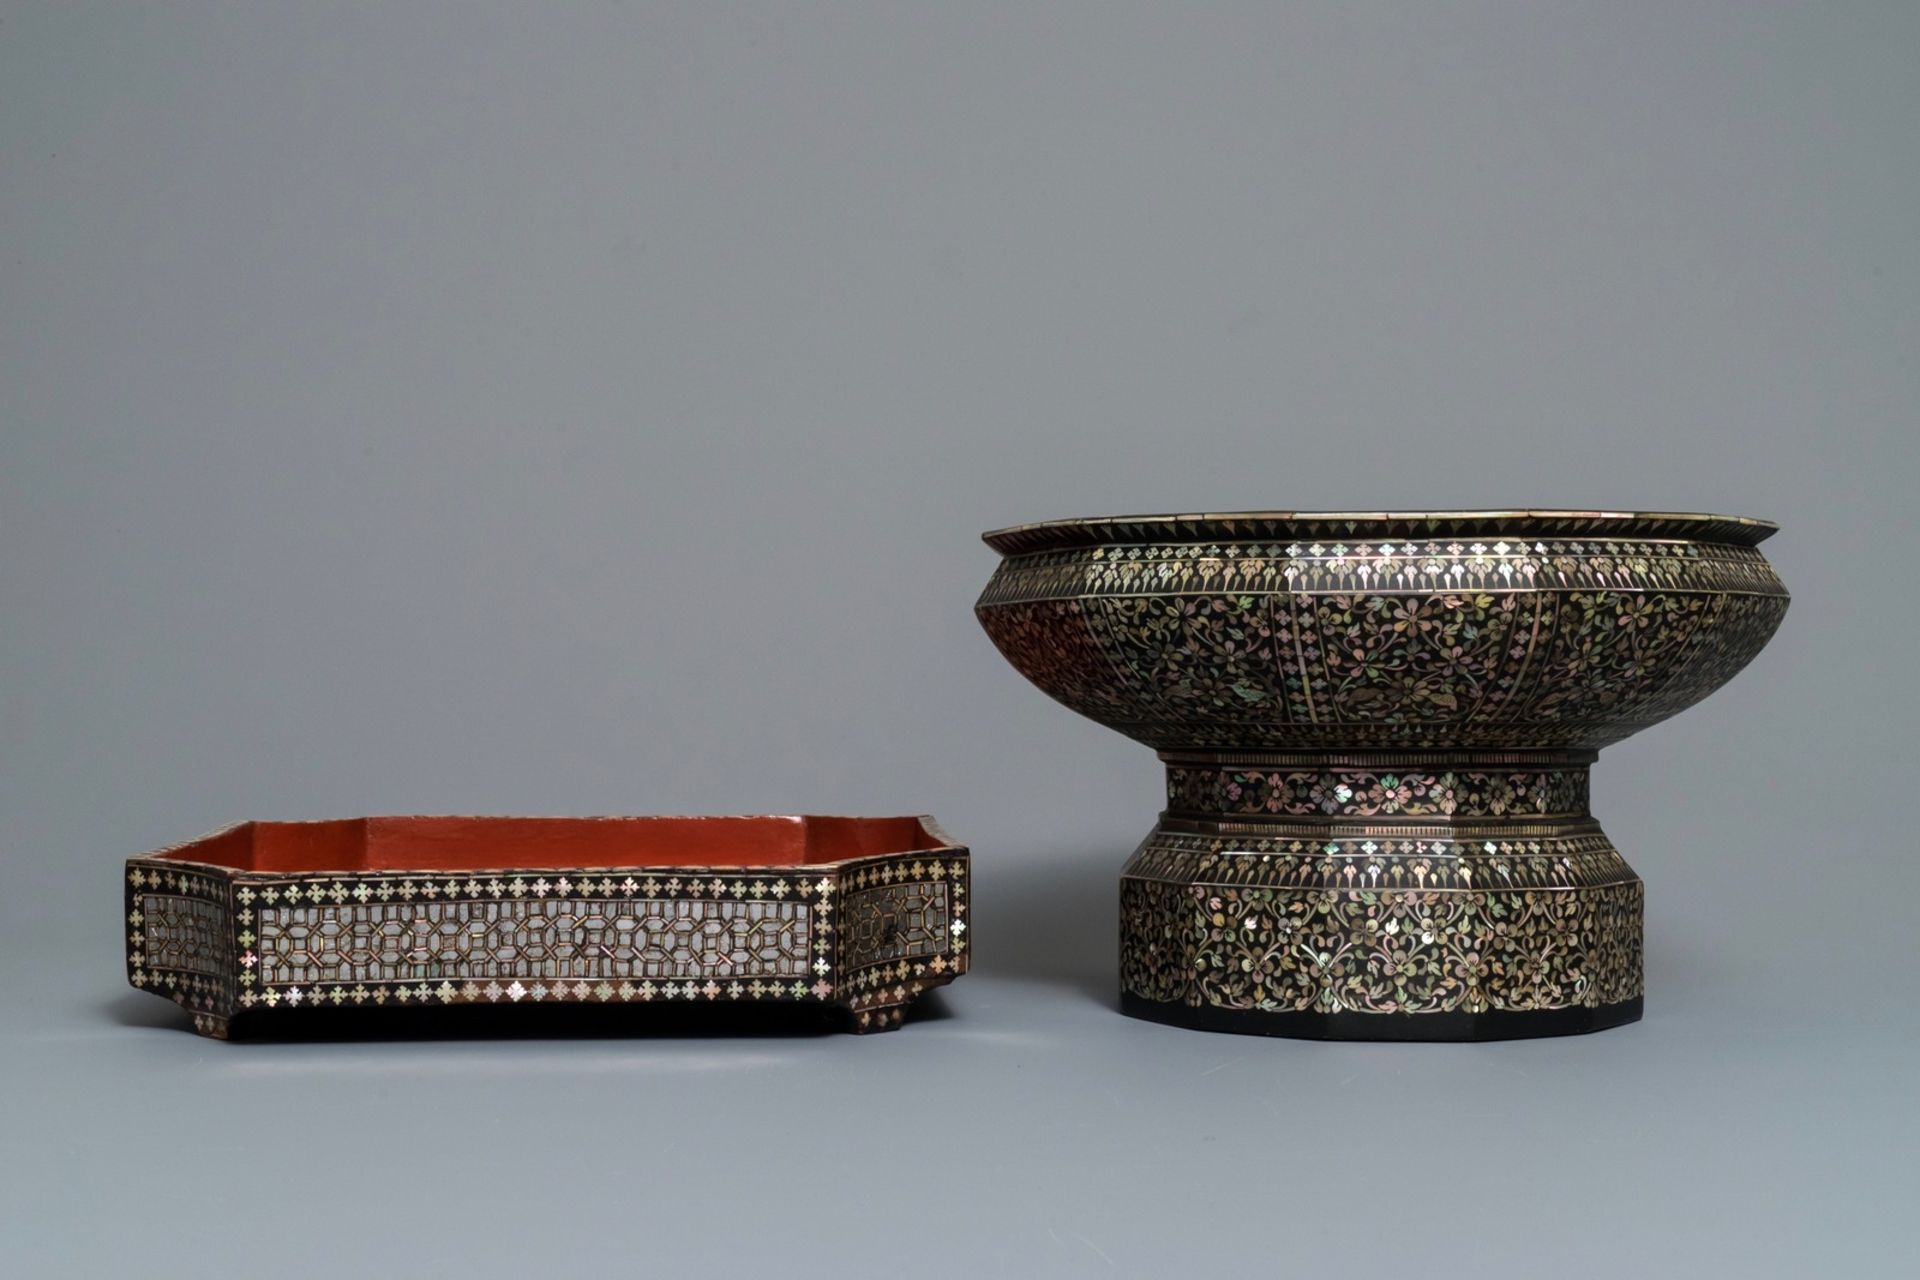 A varied collection of mother-of-pearl and mica-inlaid lacquerware, Southeast Asia, 19/20th C. - Image 2 of 10